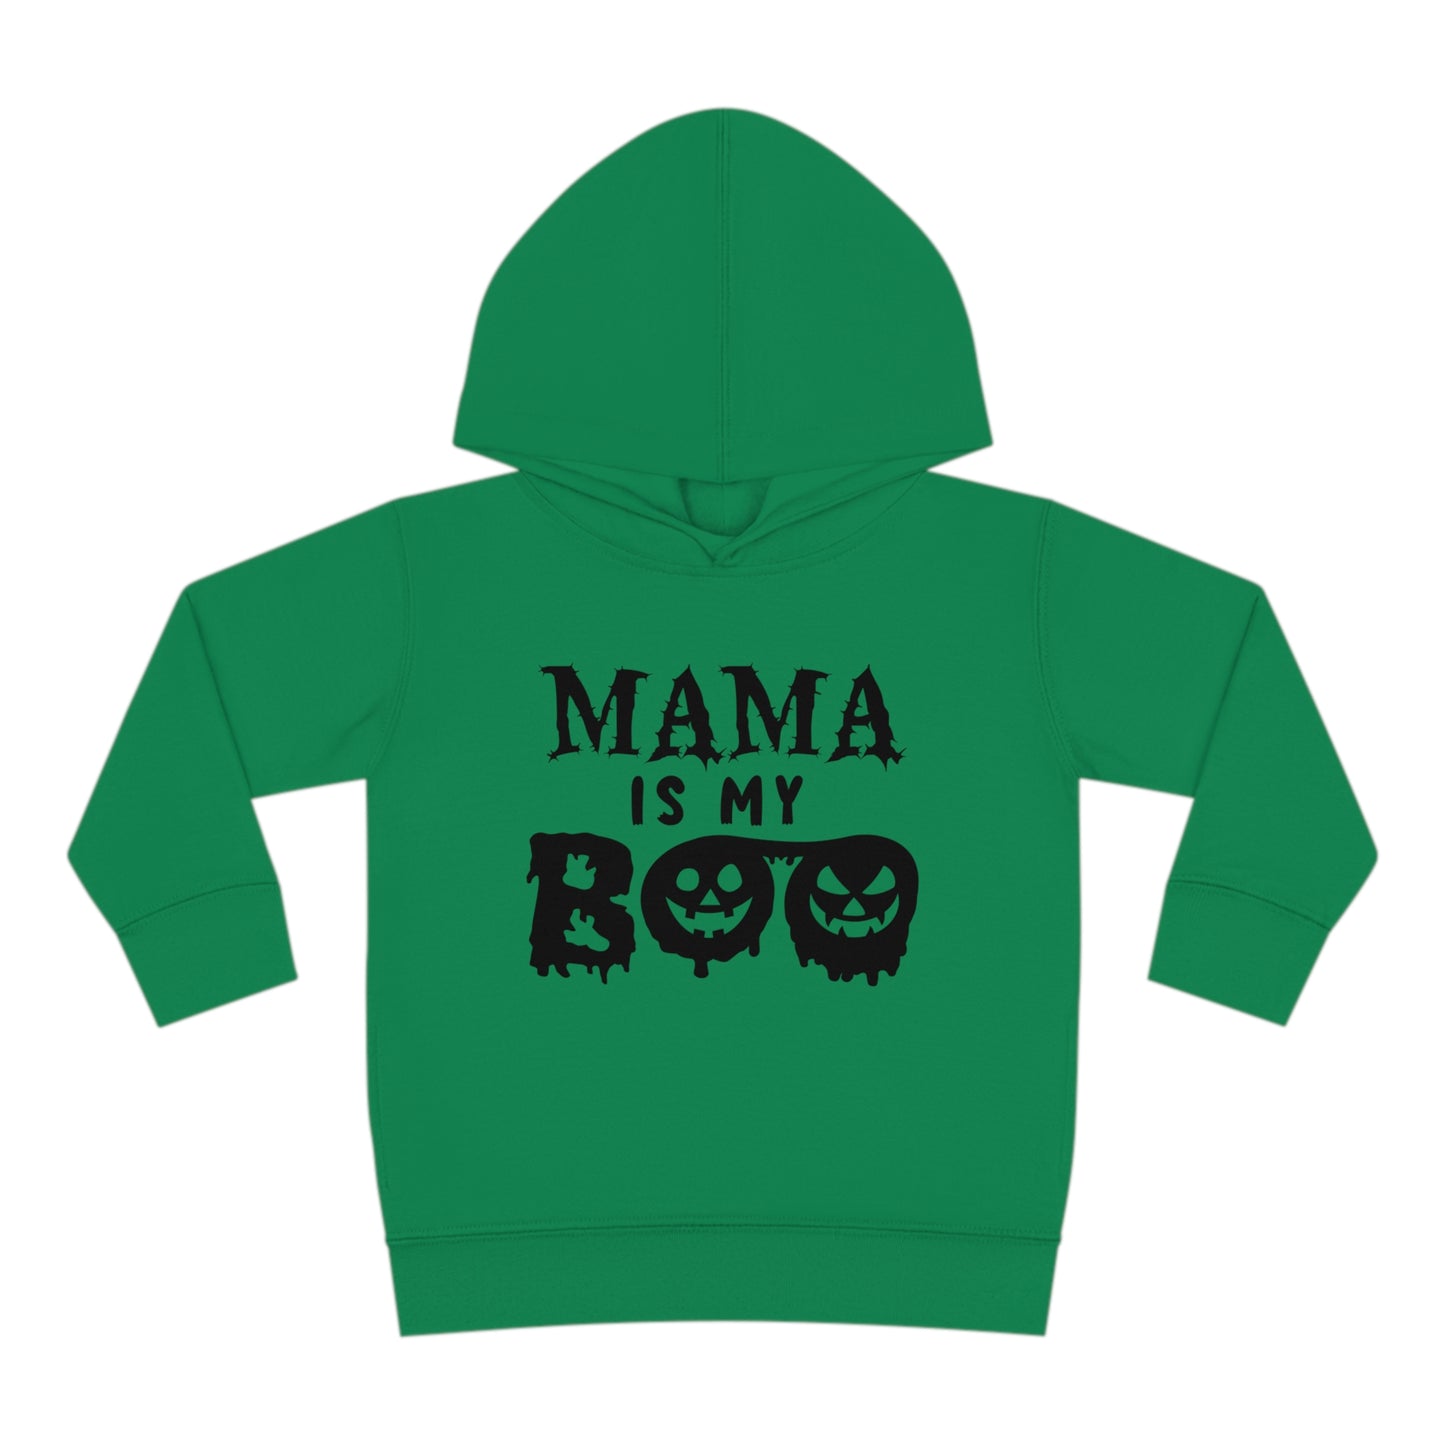 MAMA is my BOO Toddler Pullover Fleece Hoodie